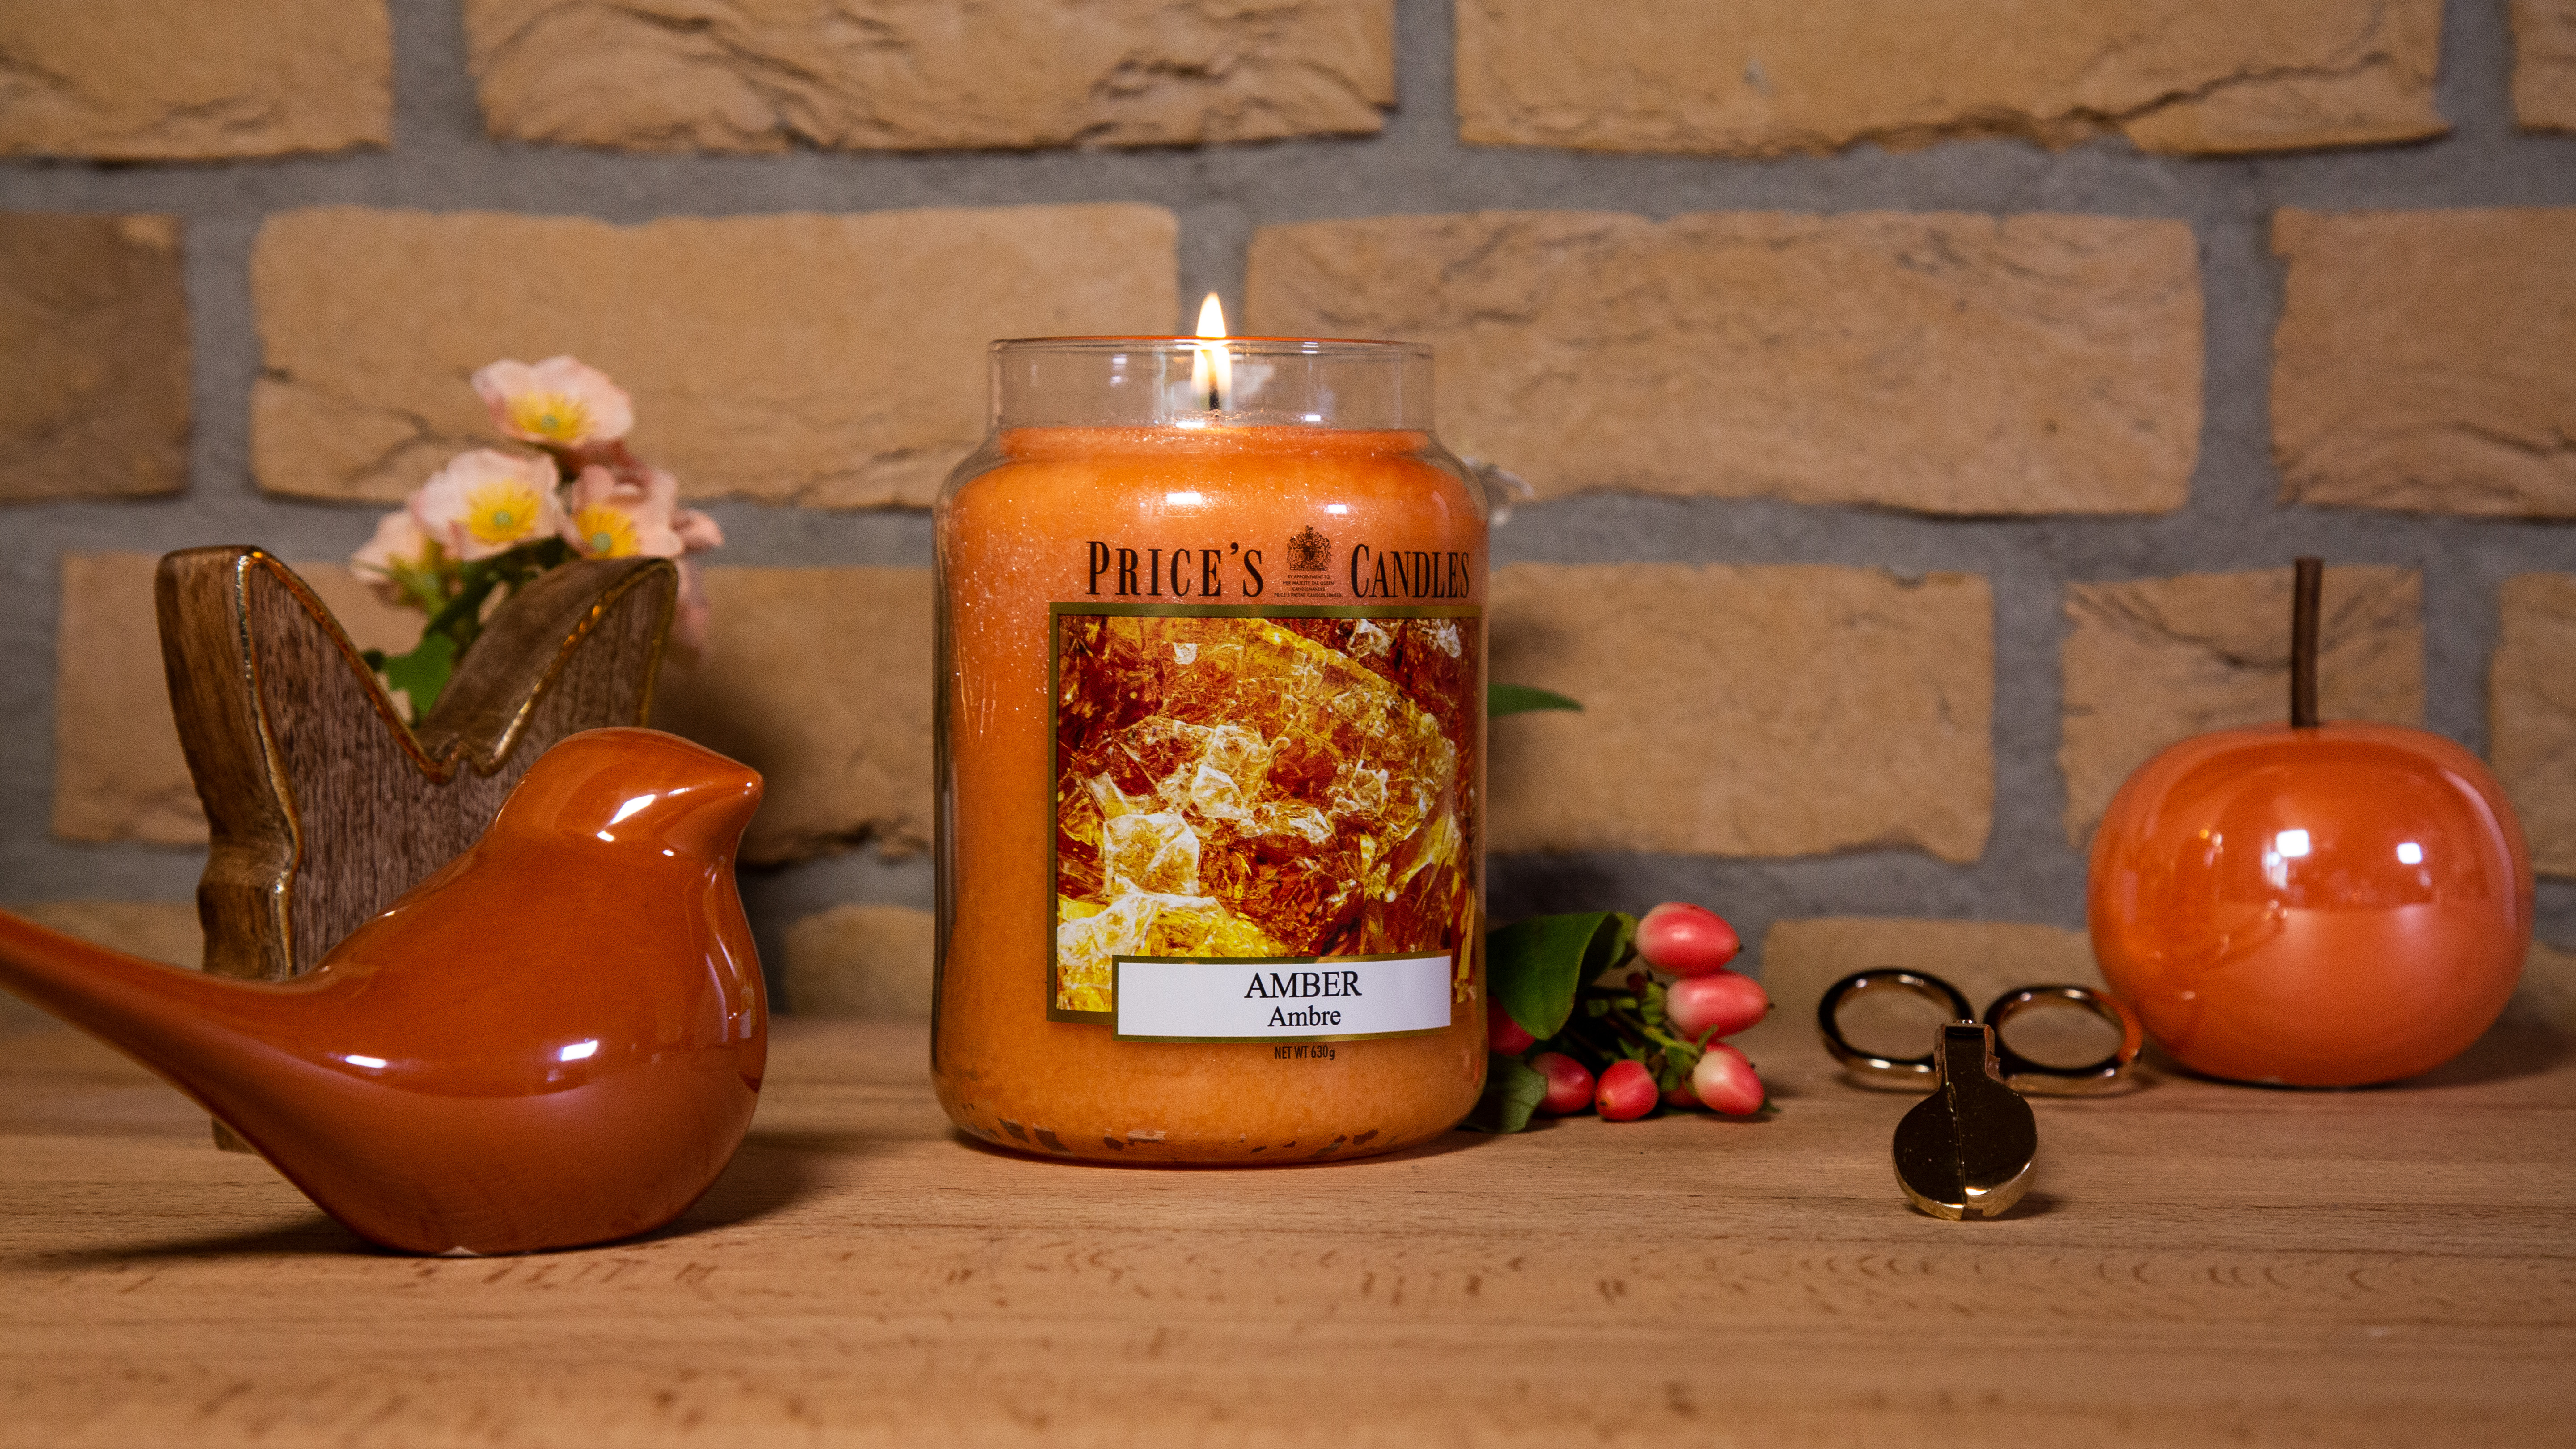 Prices Candle "Amber" 630g 